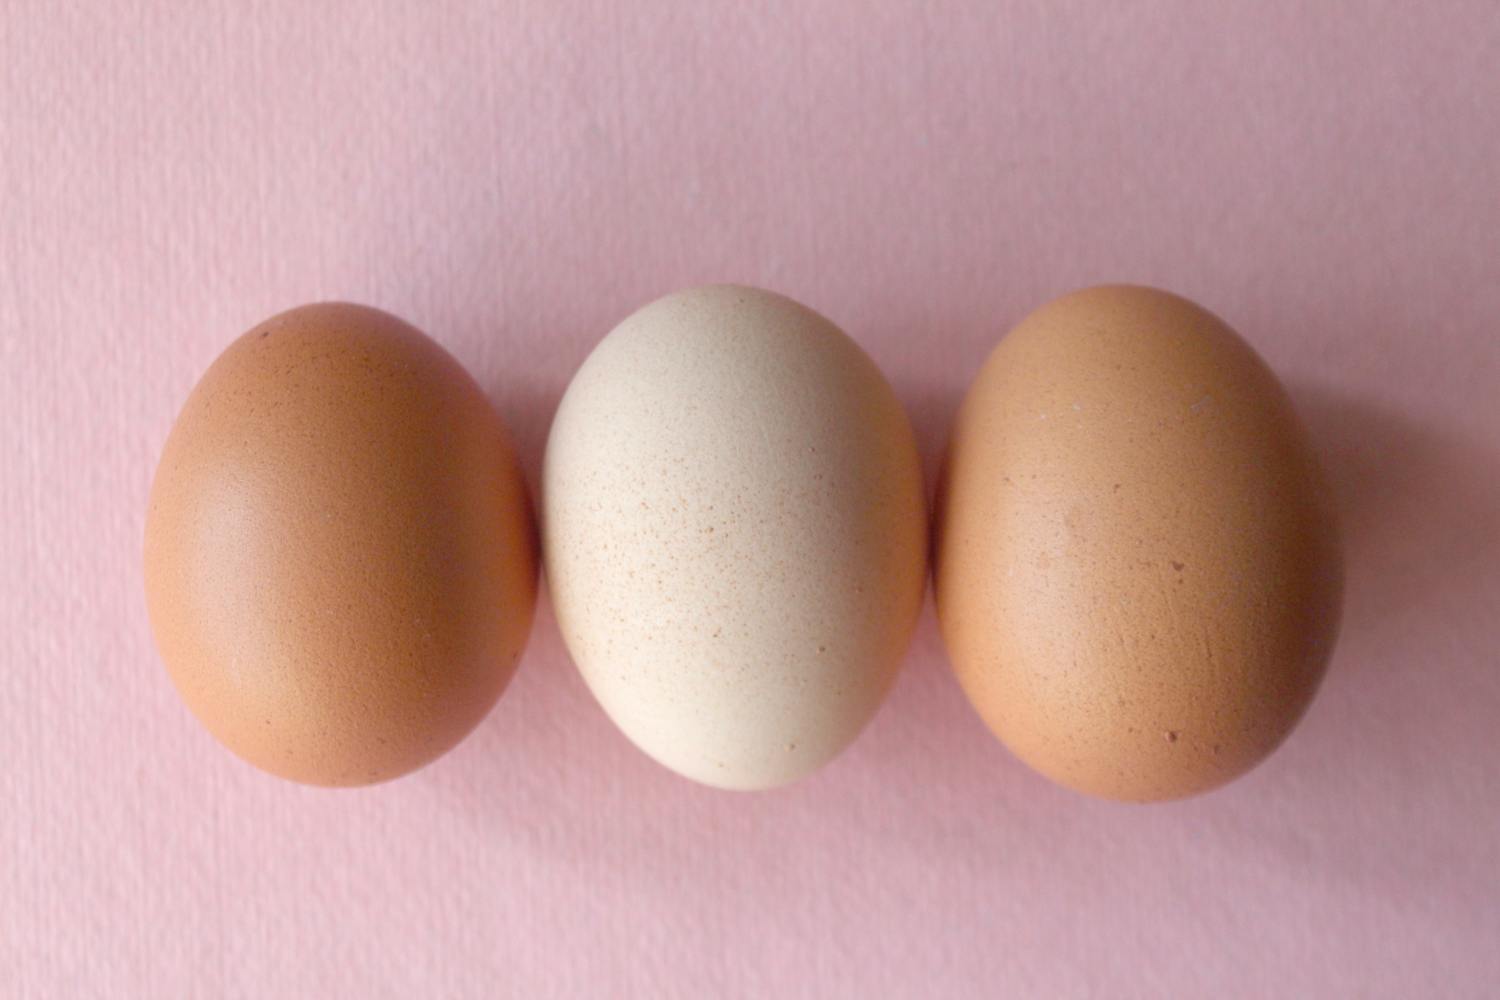 5 quick ways to tell if an egg is bad